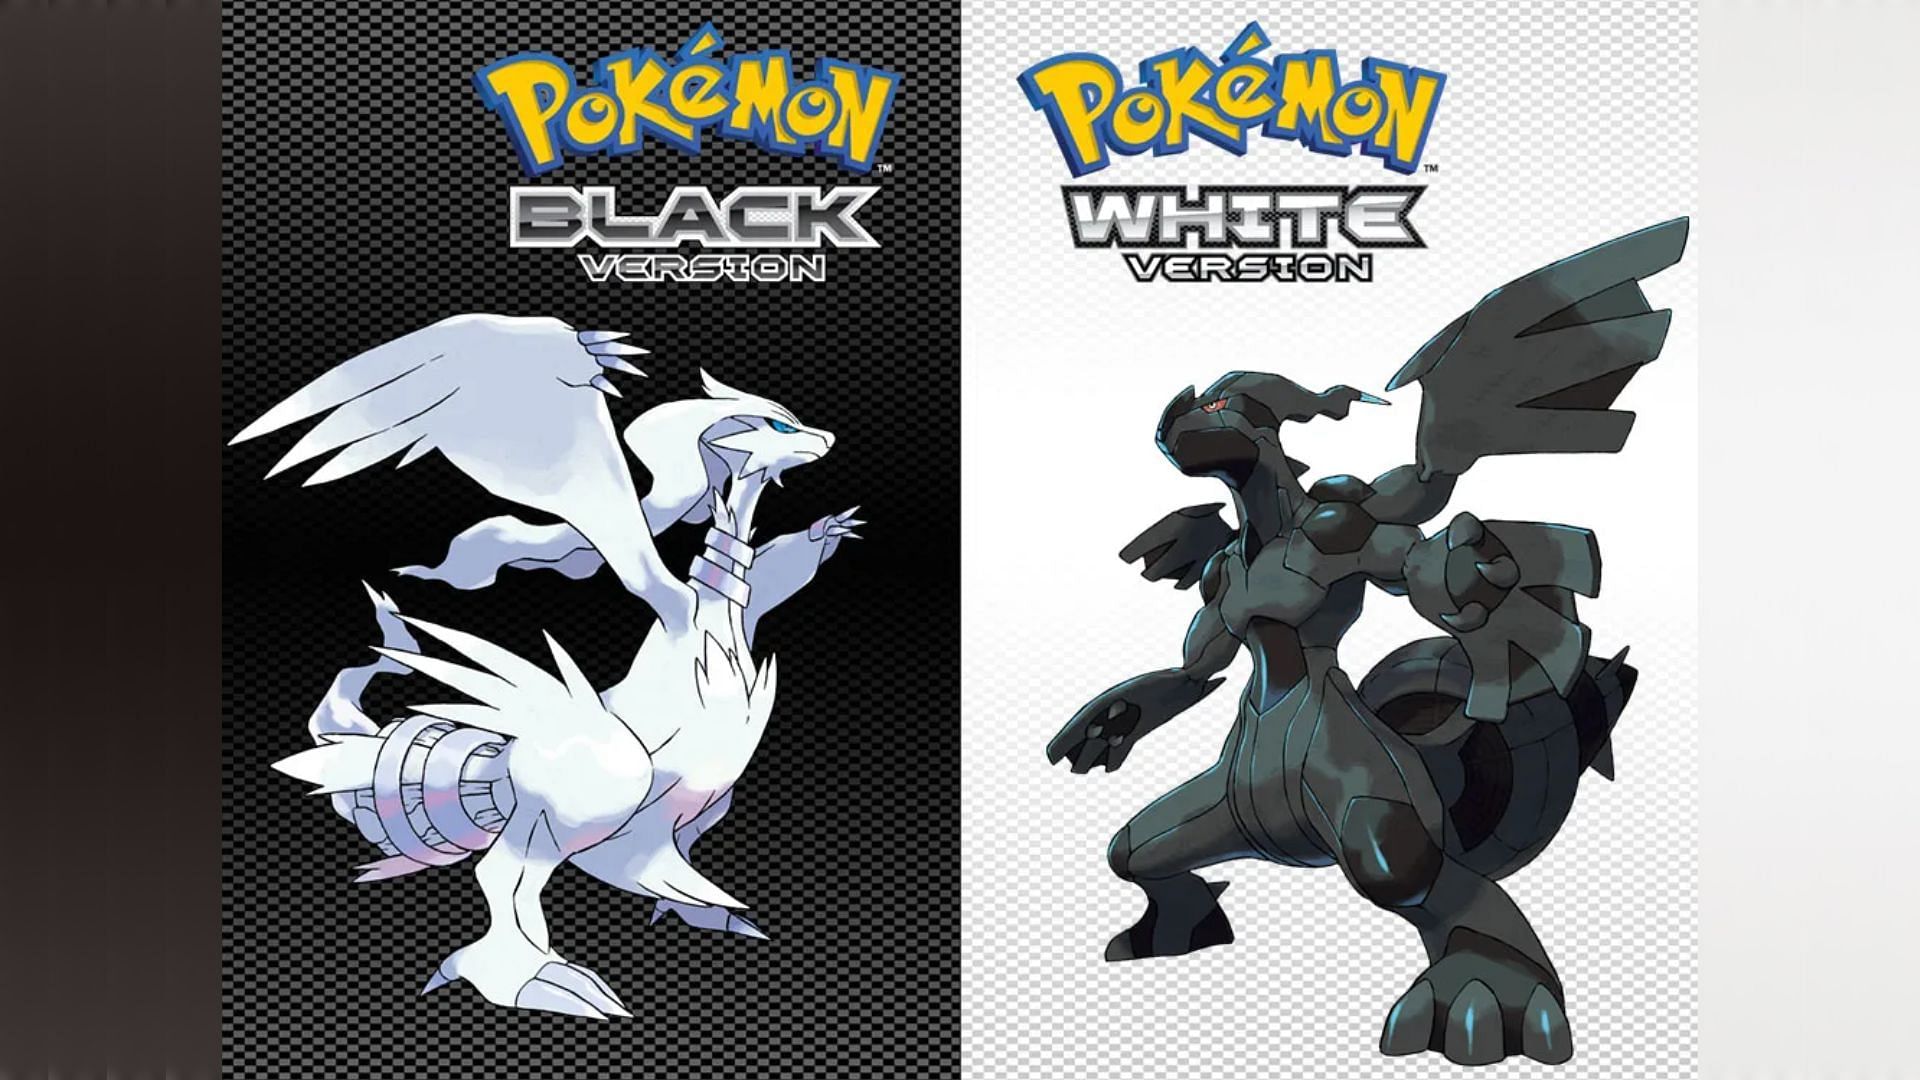 Best team composition for Pokemon Black and White